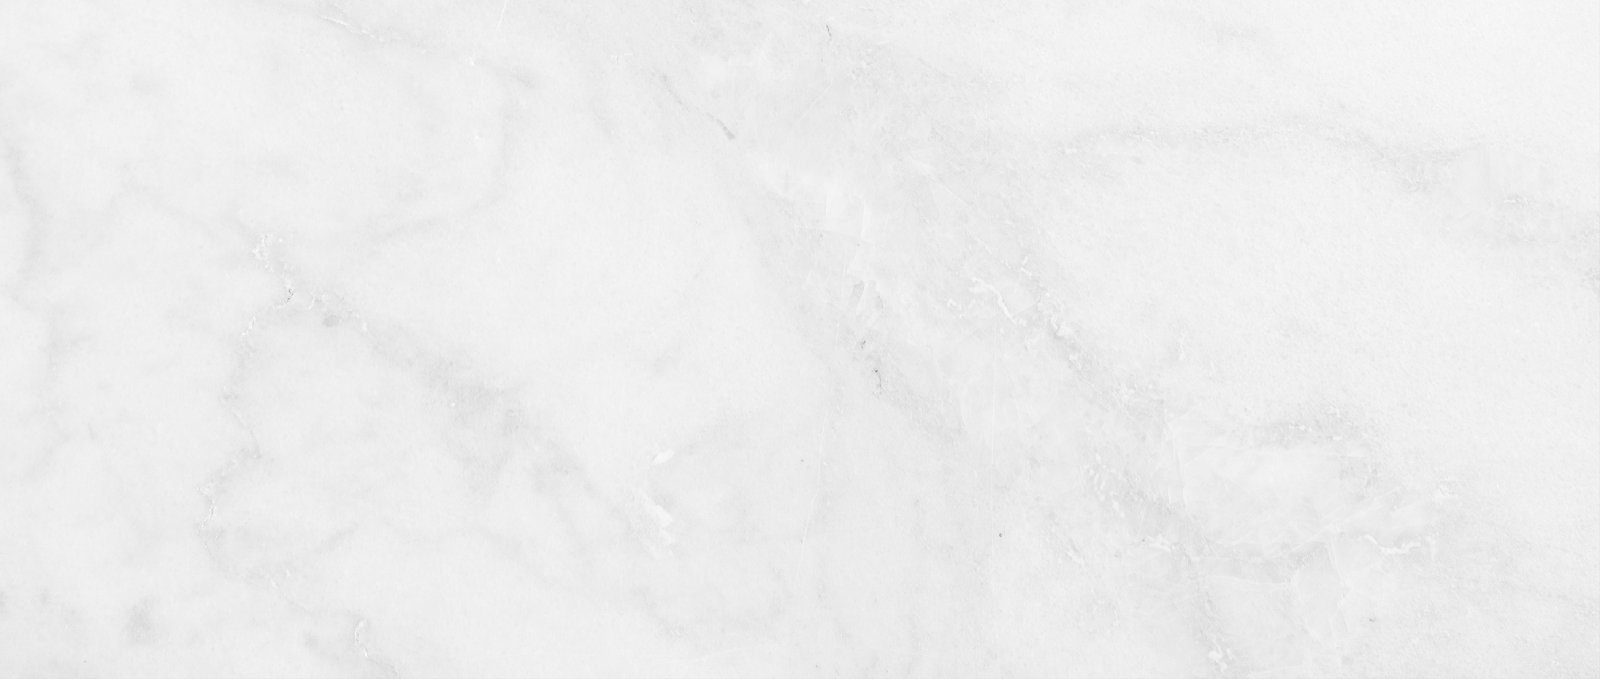 Close-up of Carrara marble stone texture with intricate grey veining on a white background.